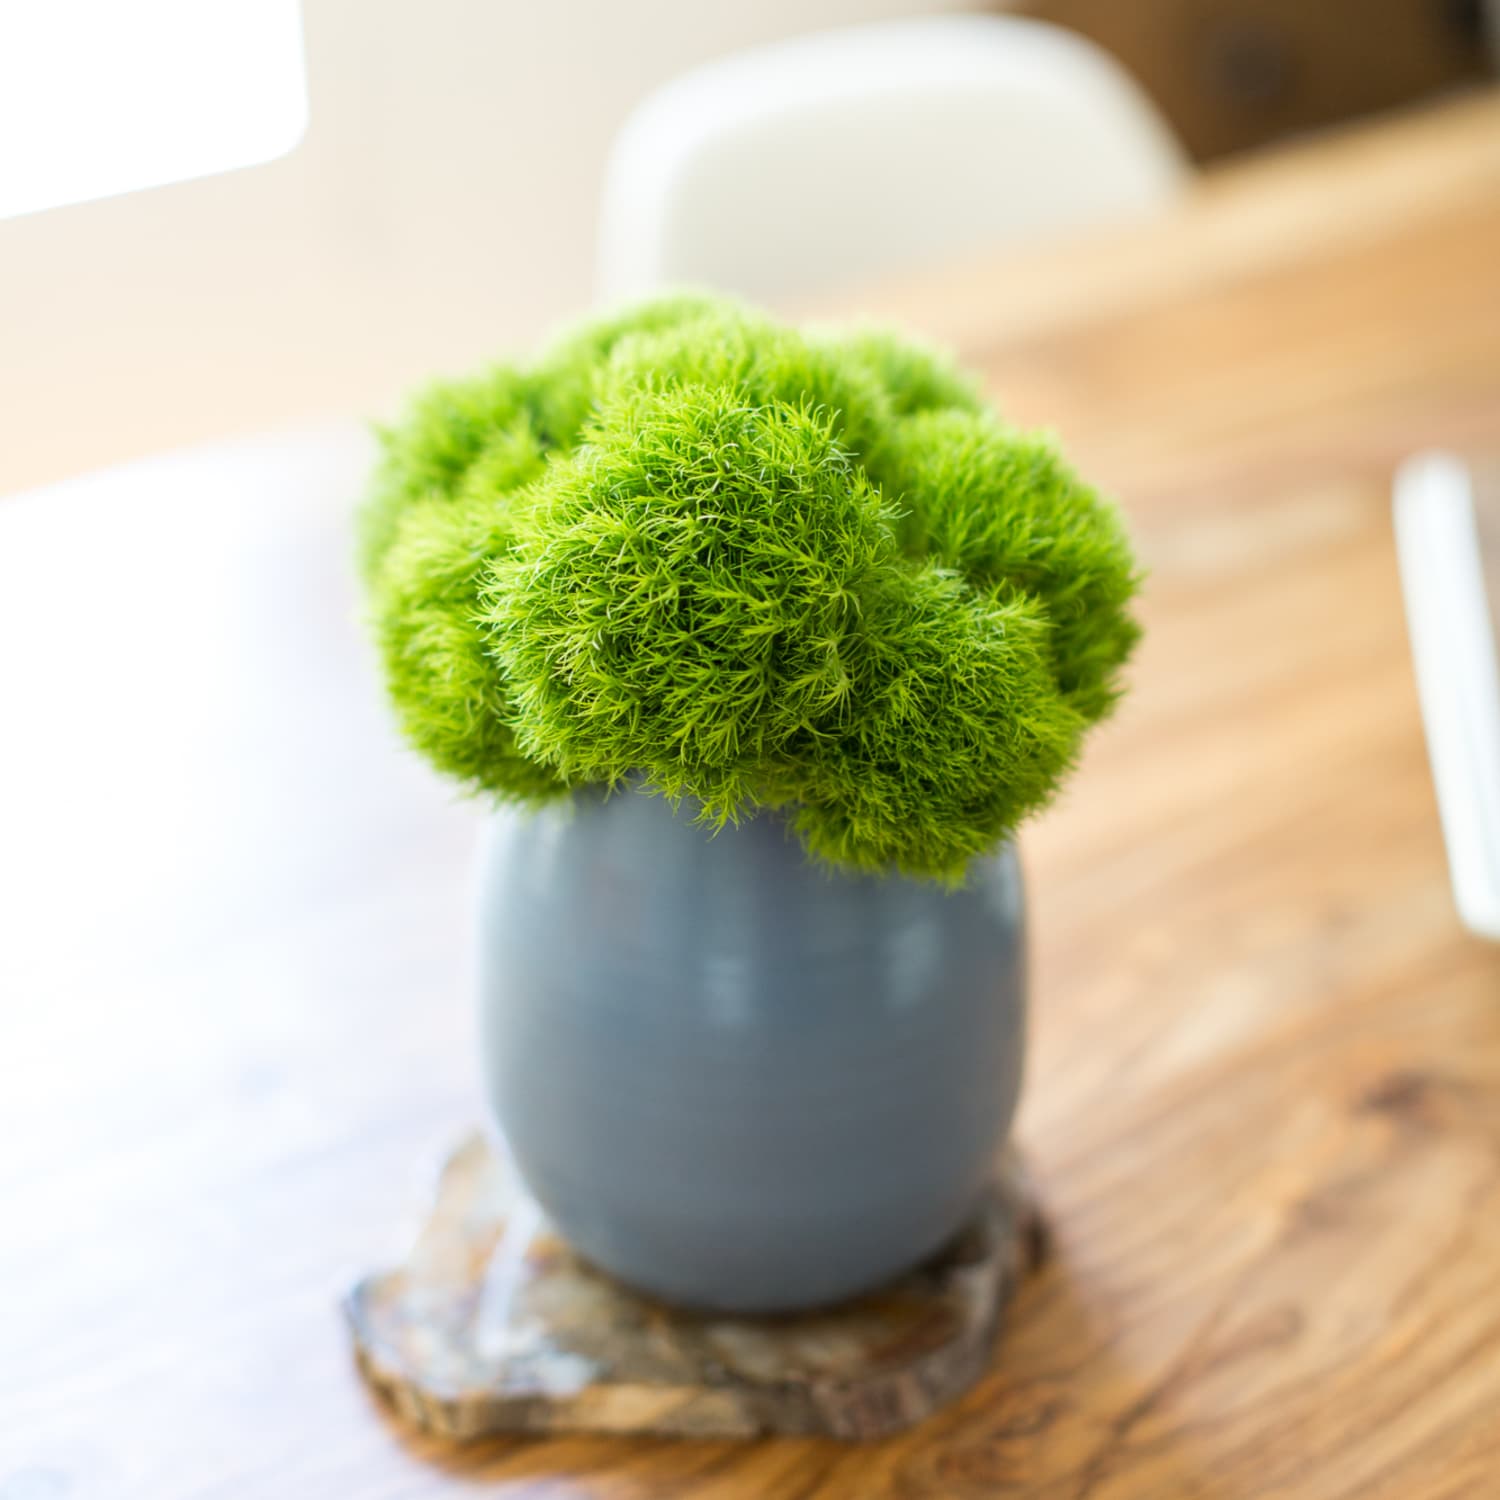 How To Grow Indoor Live Moss Garden, Where To Find Moss + Moss Care Tips